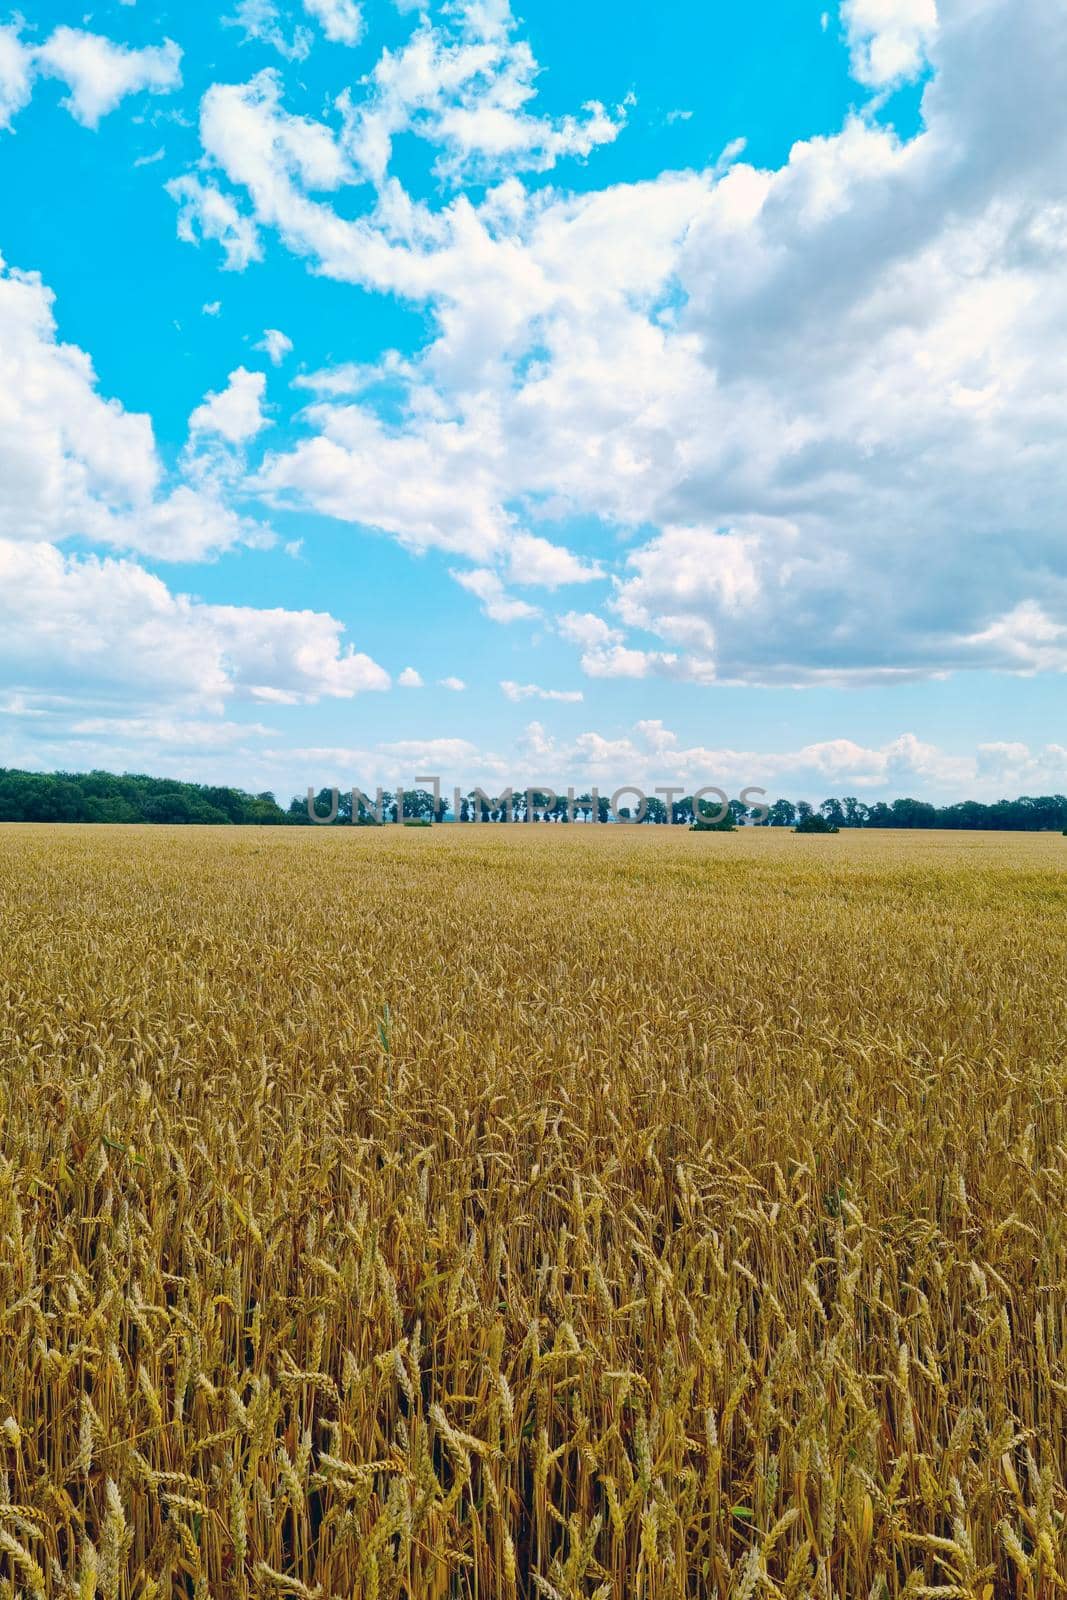 A ripe yellow field of wheat or barley on a sunny summer day. Countryside, landscape. by kip02kas